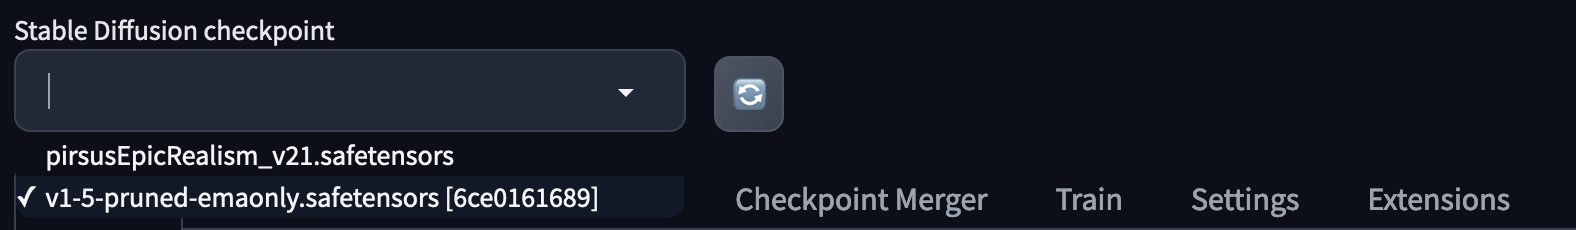 New Checkpoint